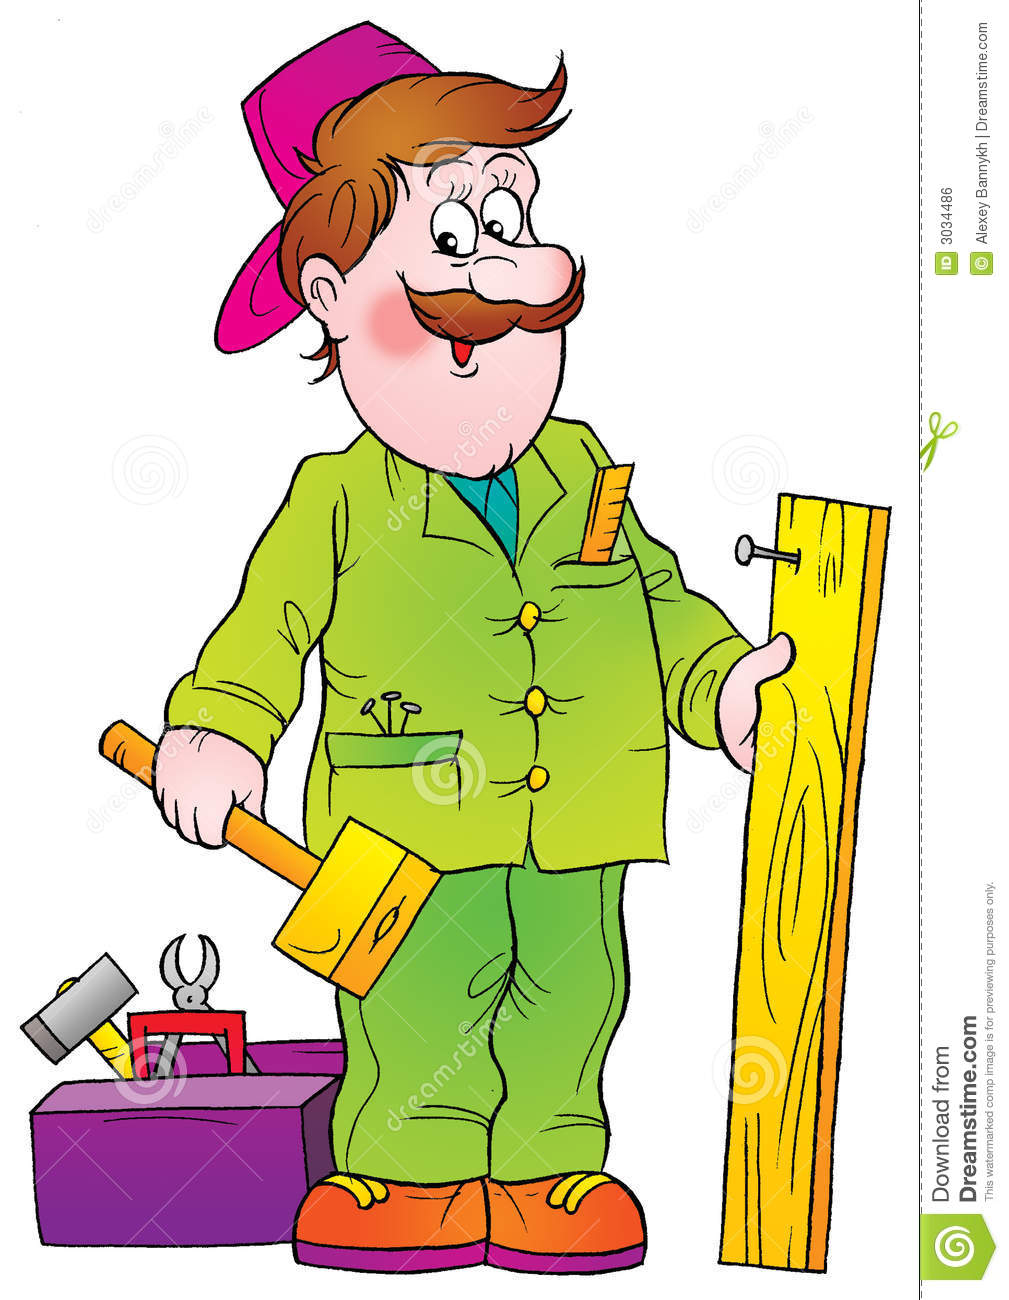 Free Clip Art Images Of Carpentry Tools | School Clipart